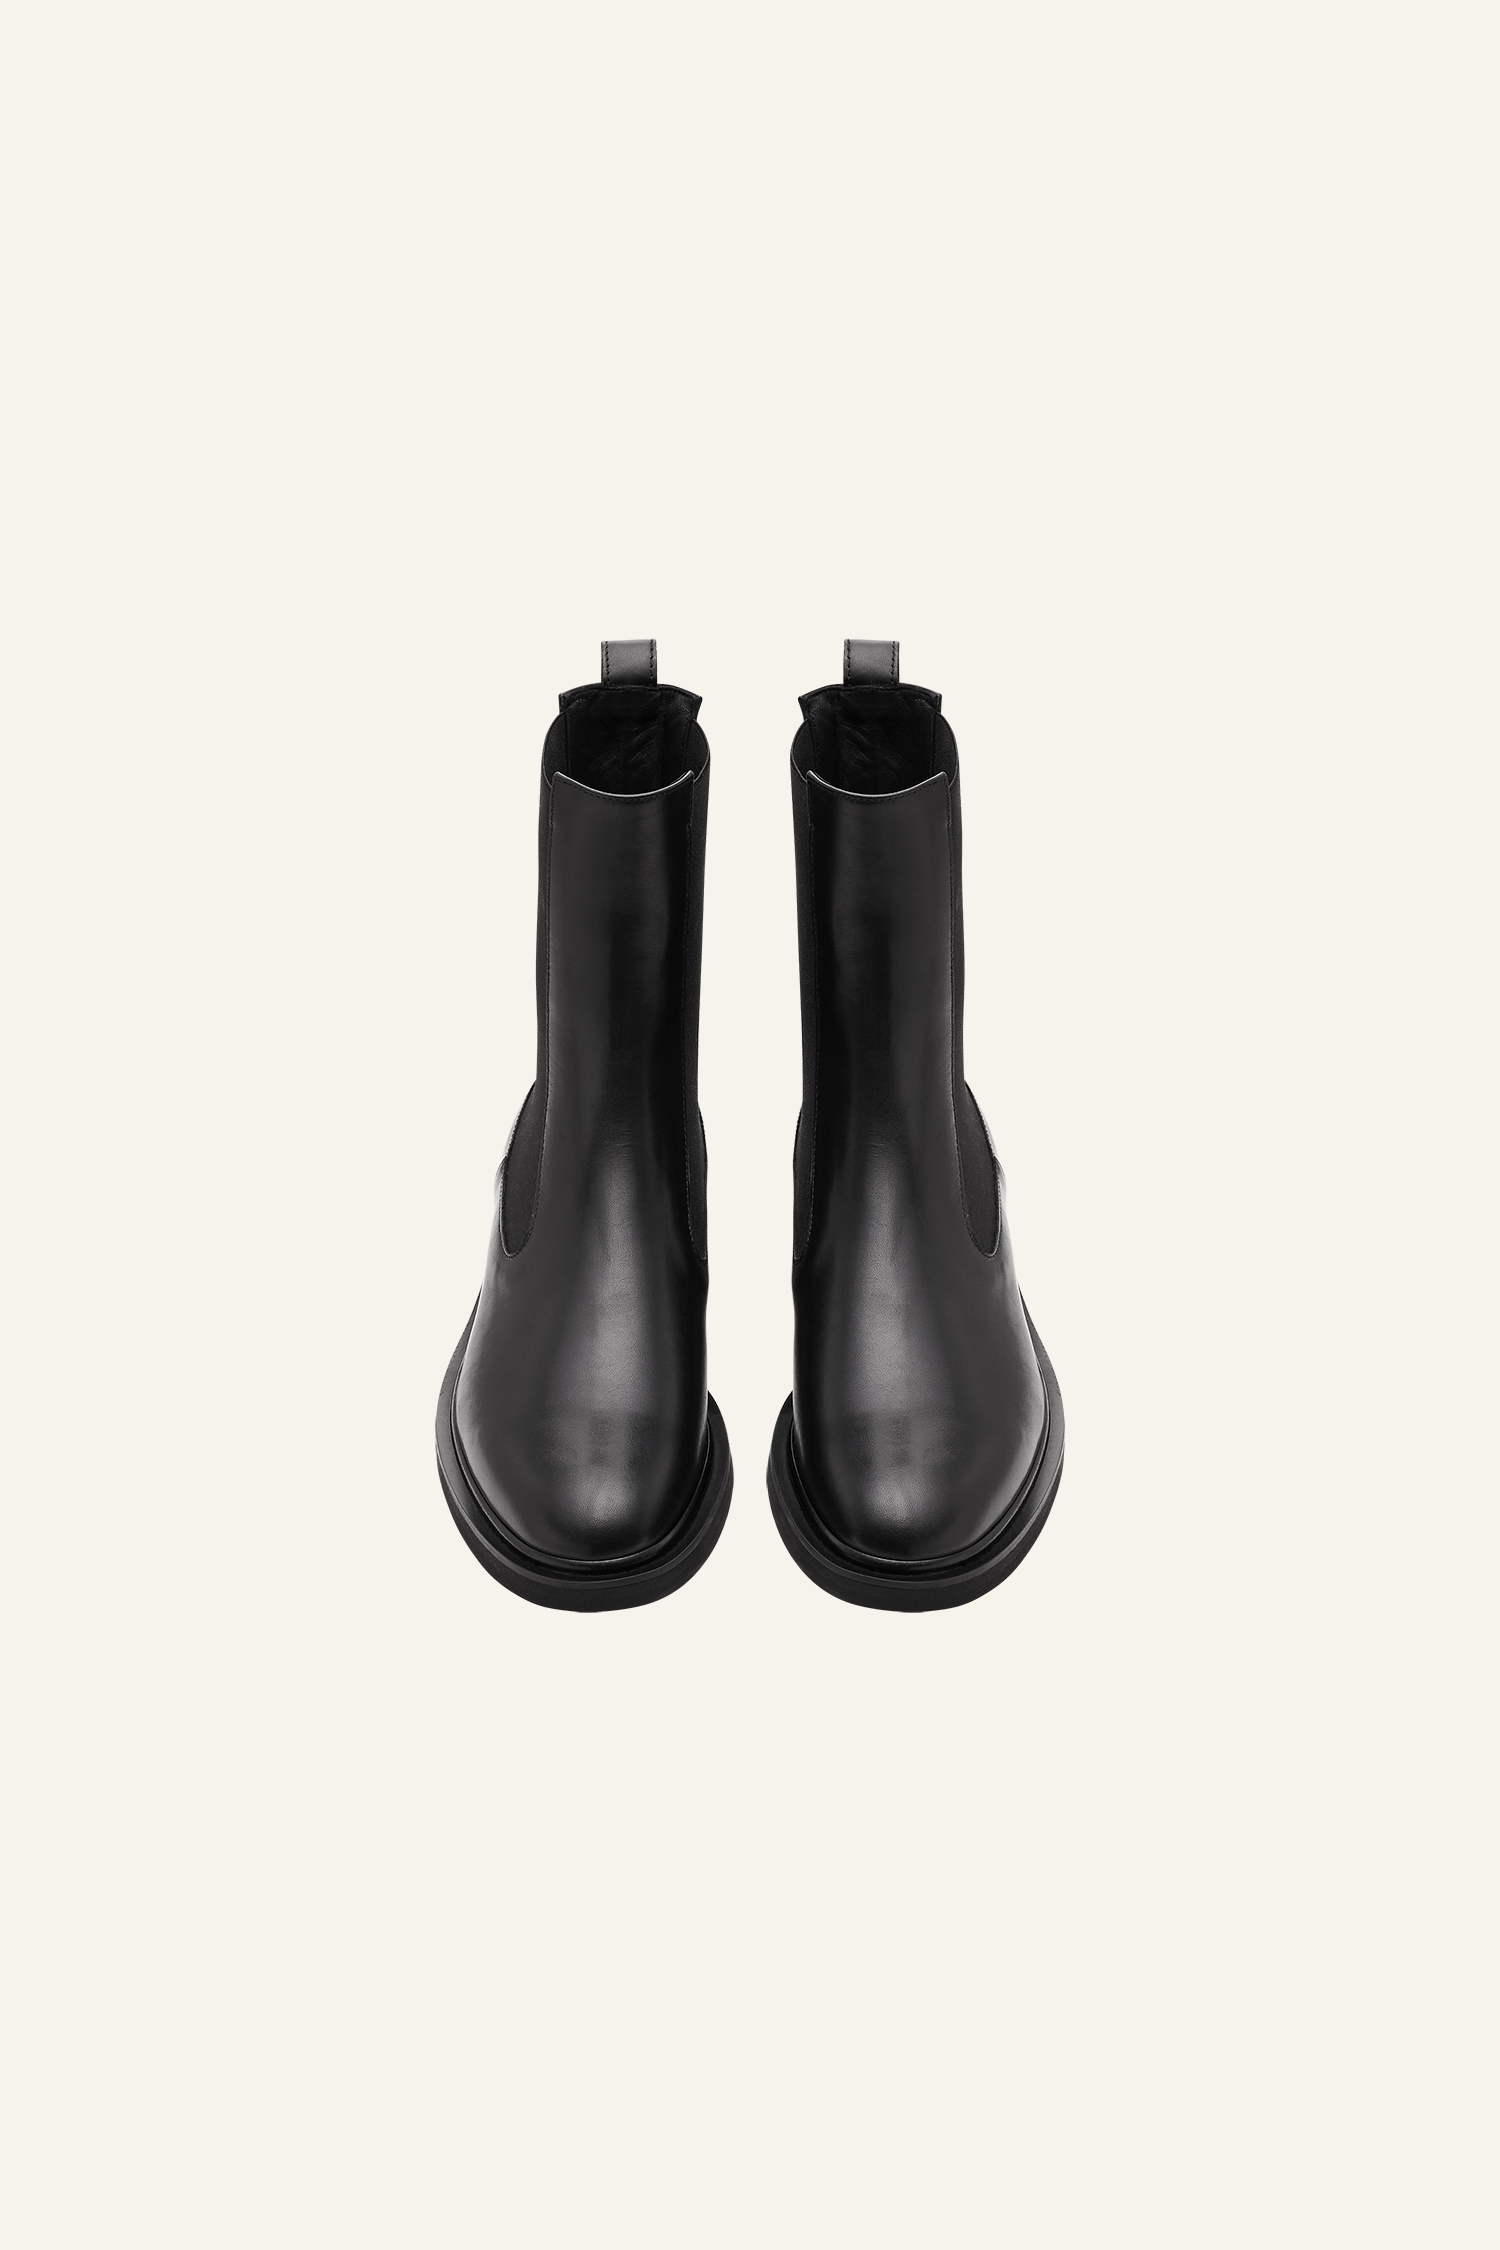 A.Emery Grace Boot in Black from The New Trend 